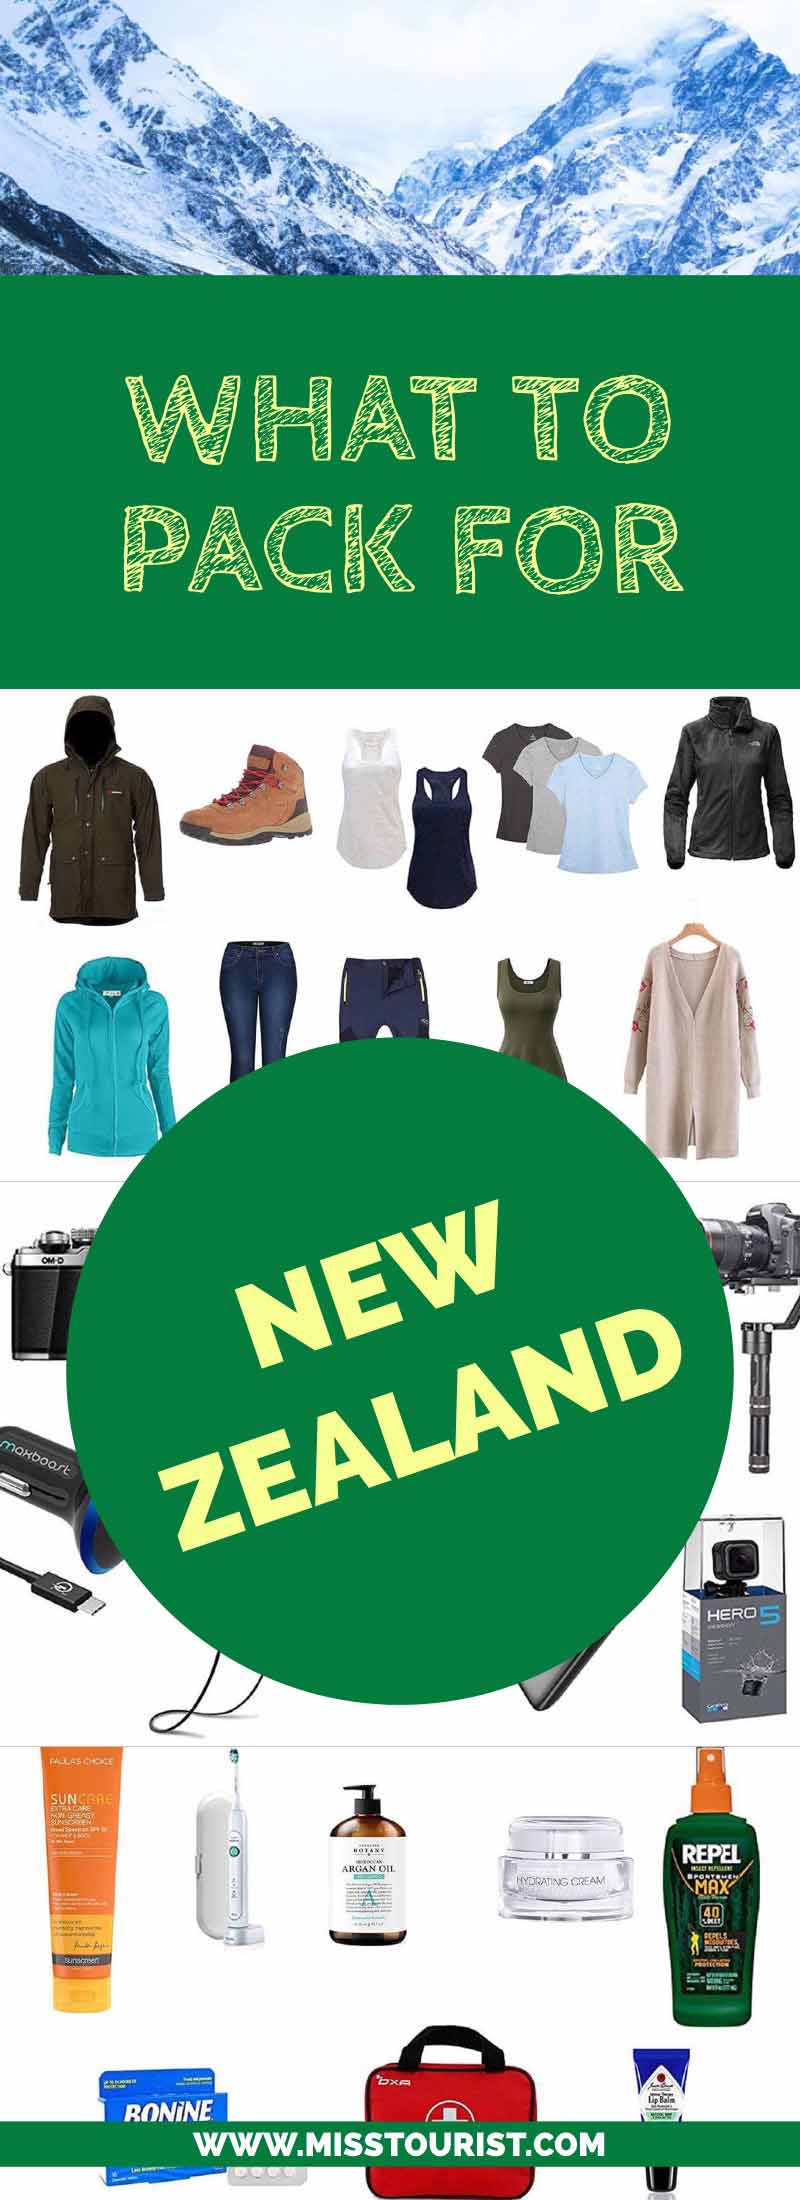 What to pack for your New Zealand trip all seasons list pint it for later 2